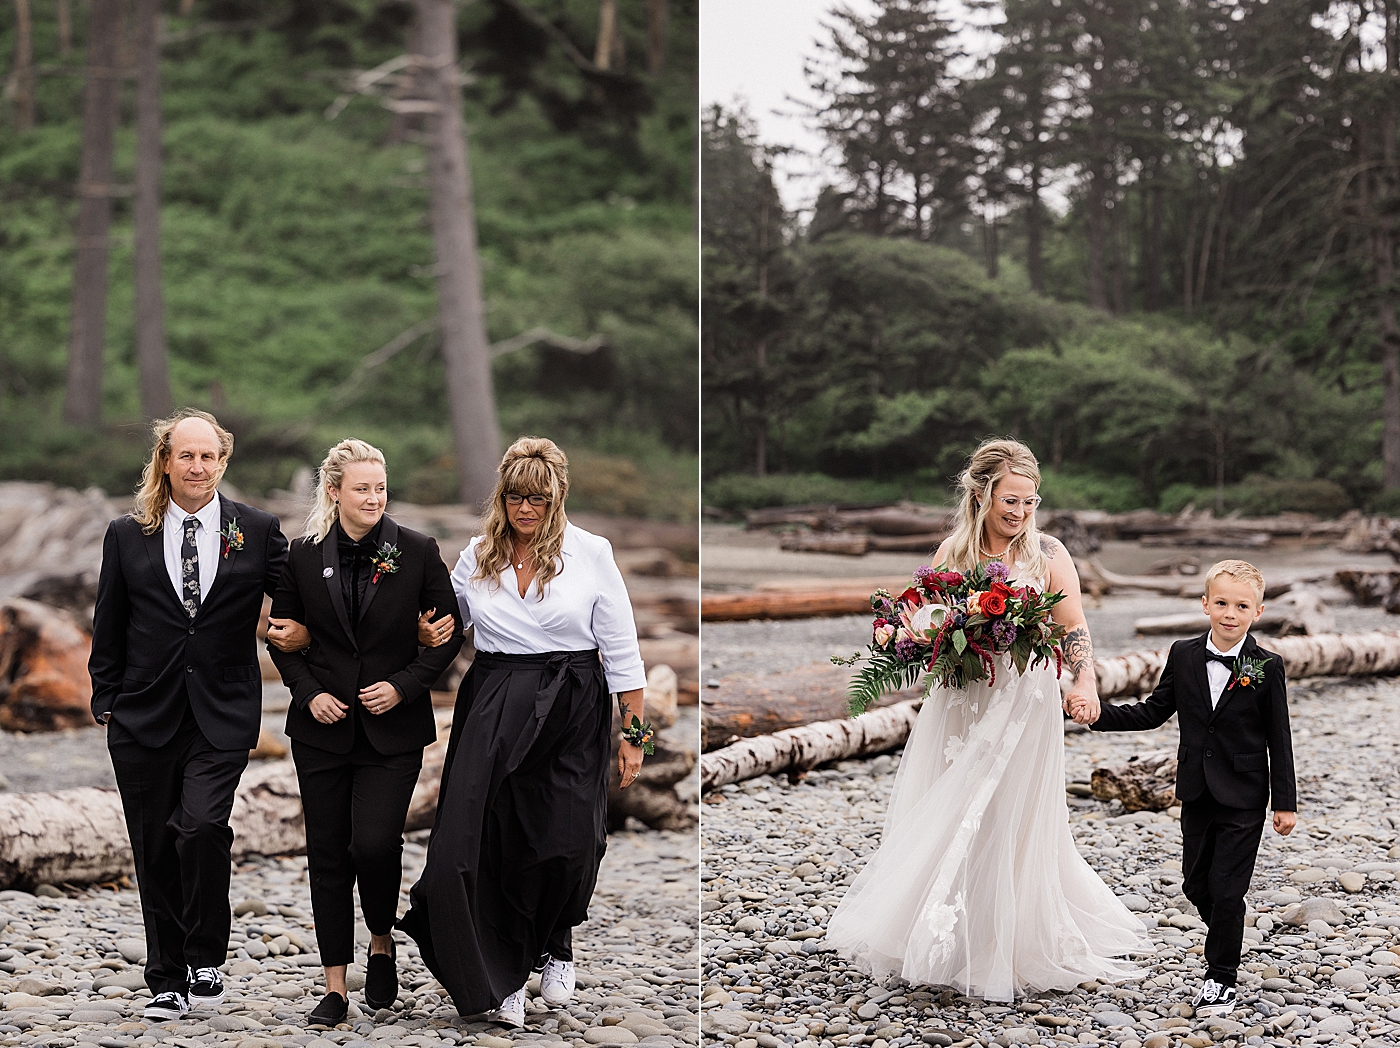 Bride's walking down aisle to ceremony site on Ruby Beach. Photo by Megan Montalvo Photography.